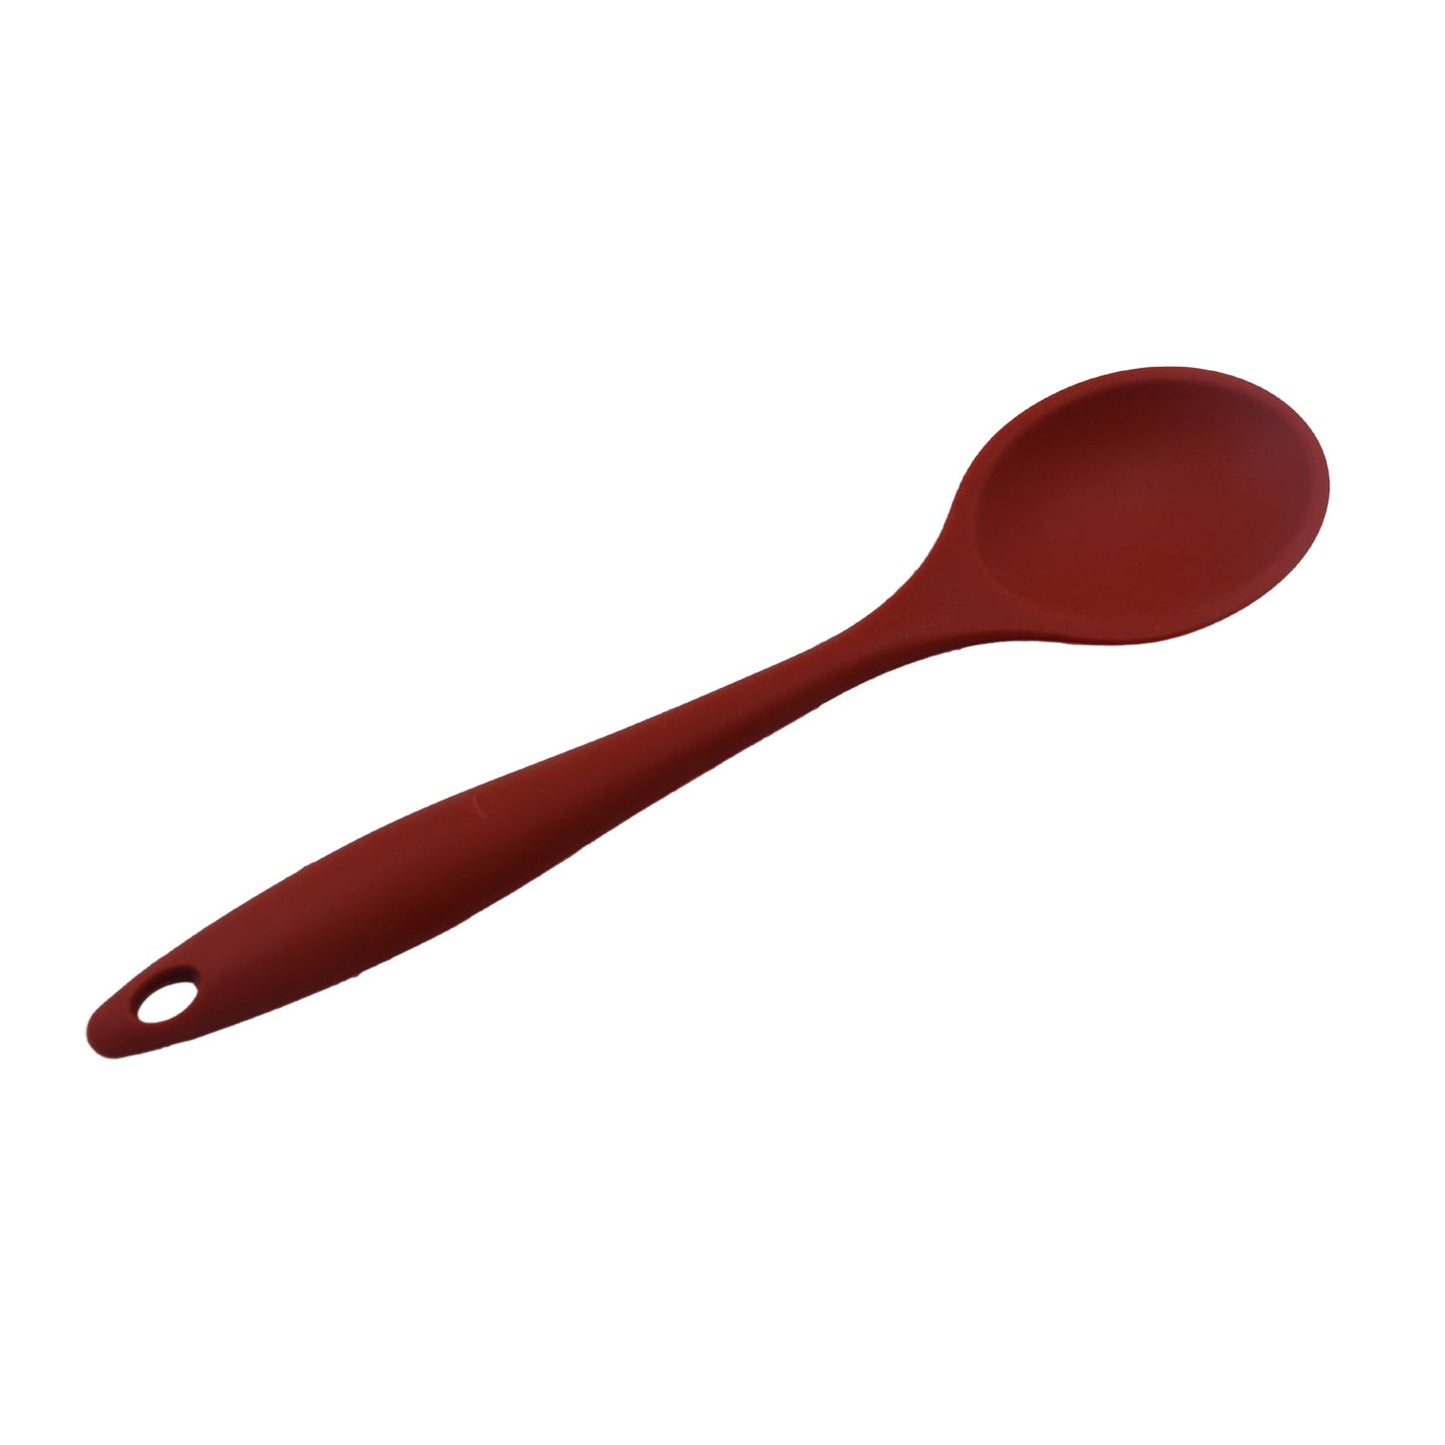 HEAT RESISTANT SILICONE BASTING SPOON NON-STICK SPOON HYGIENIC SOLID COATING COOKWARE KITCHEN TOOLS (27CM)